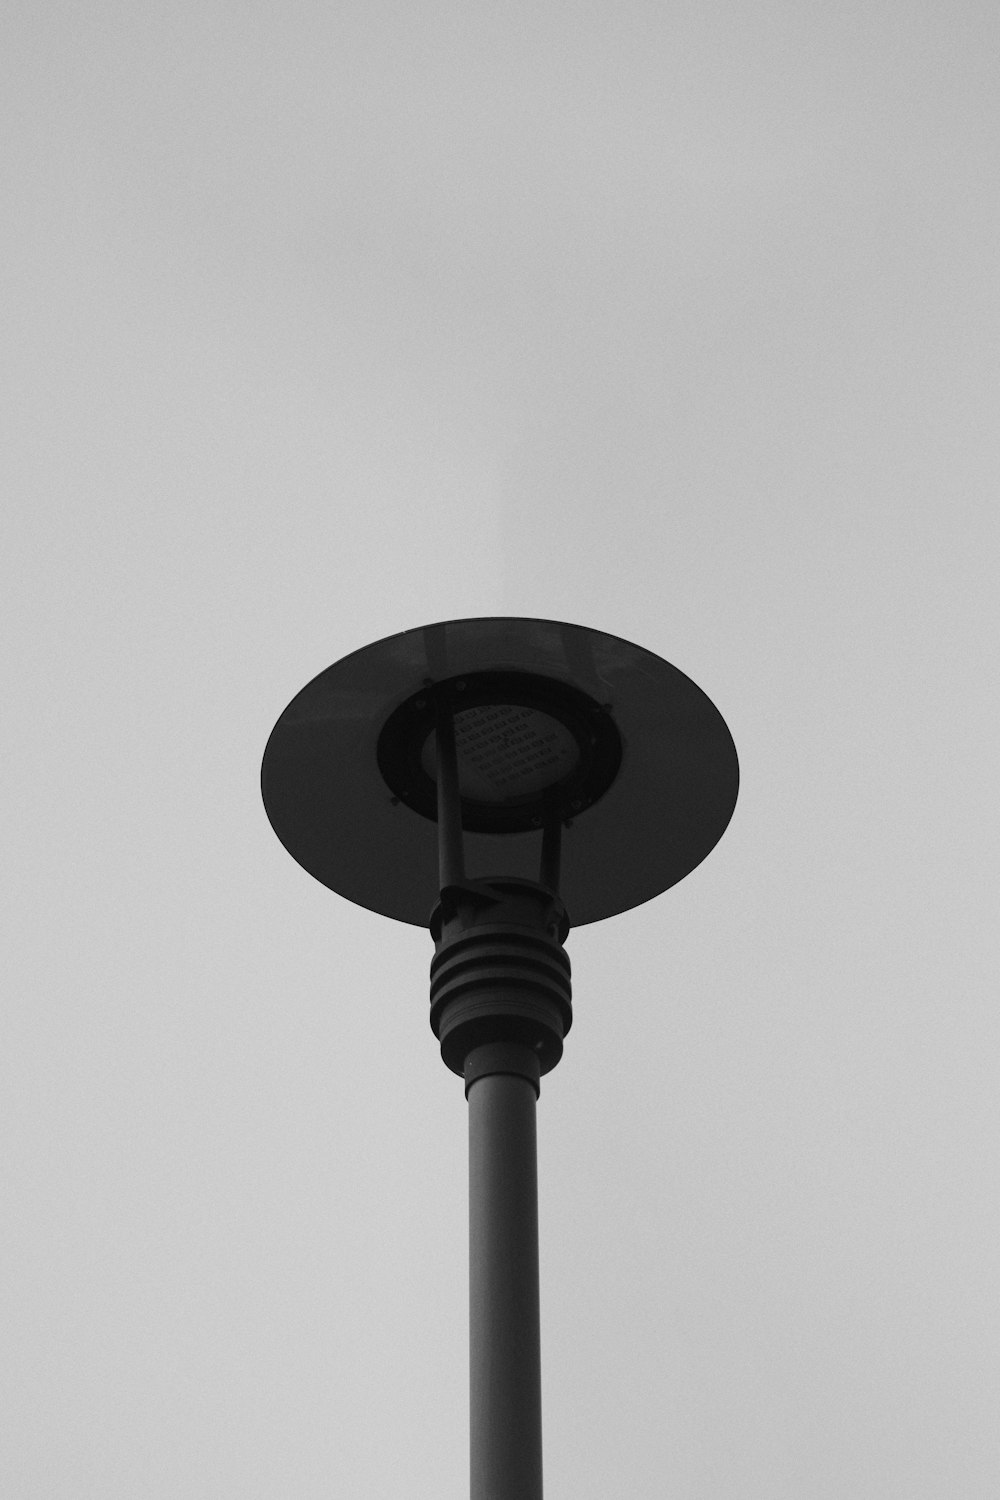 a black and white lamp post